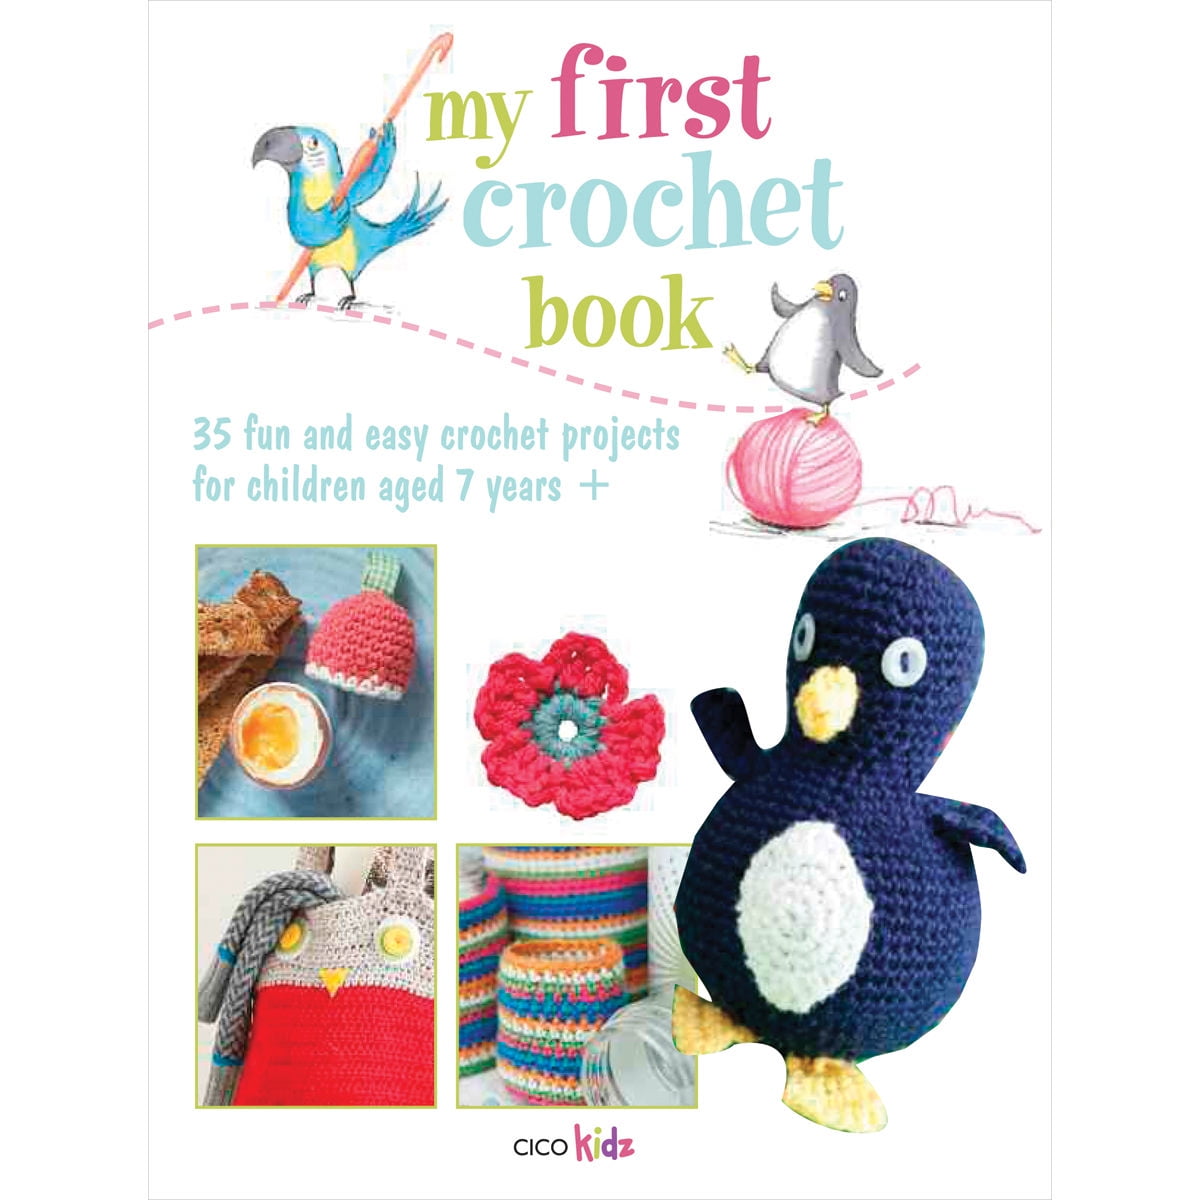 My First Crochet Book : 35 fun and easy crochet projects for